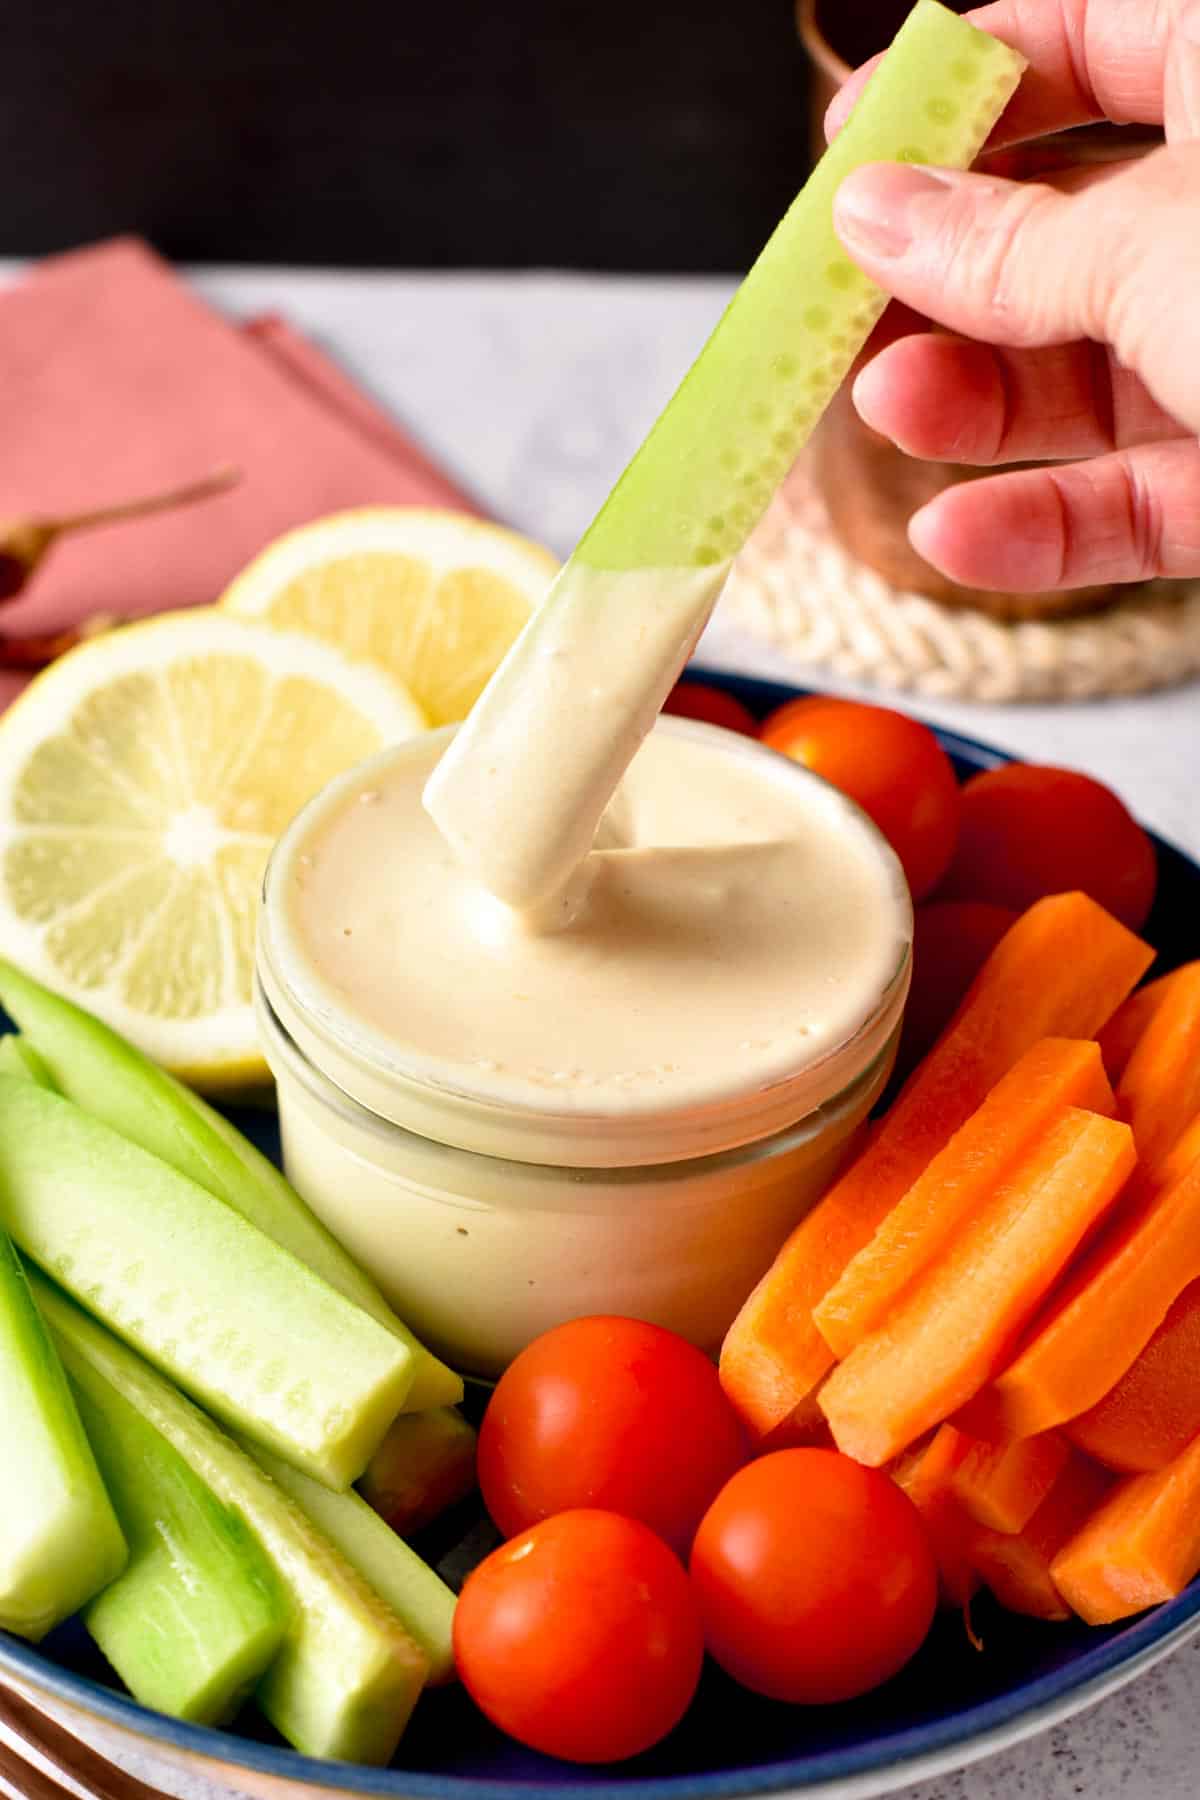 This Tahini Sauce is a creamy dairy-free sauce packed with plant-based proteins from sesame seeds and delicious on top of salad, roasted vegetables or as a tahini salad dressing.